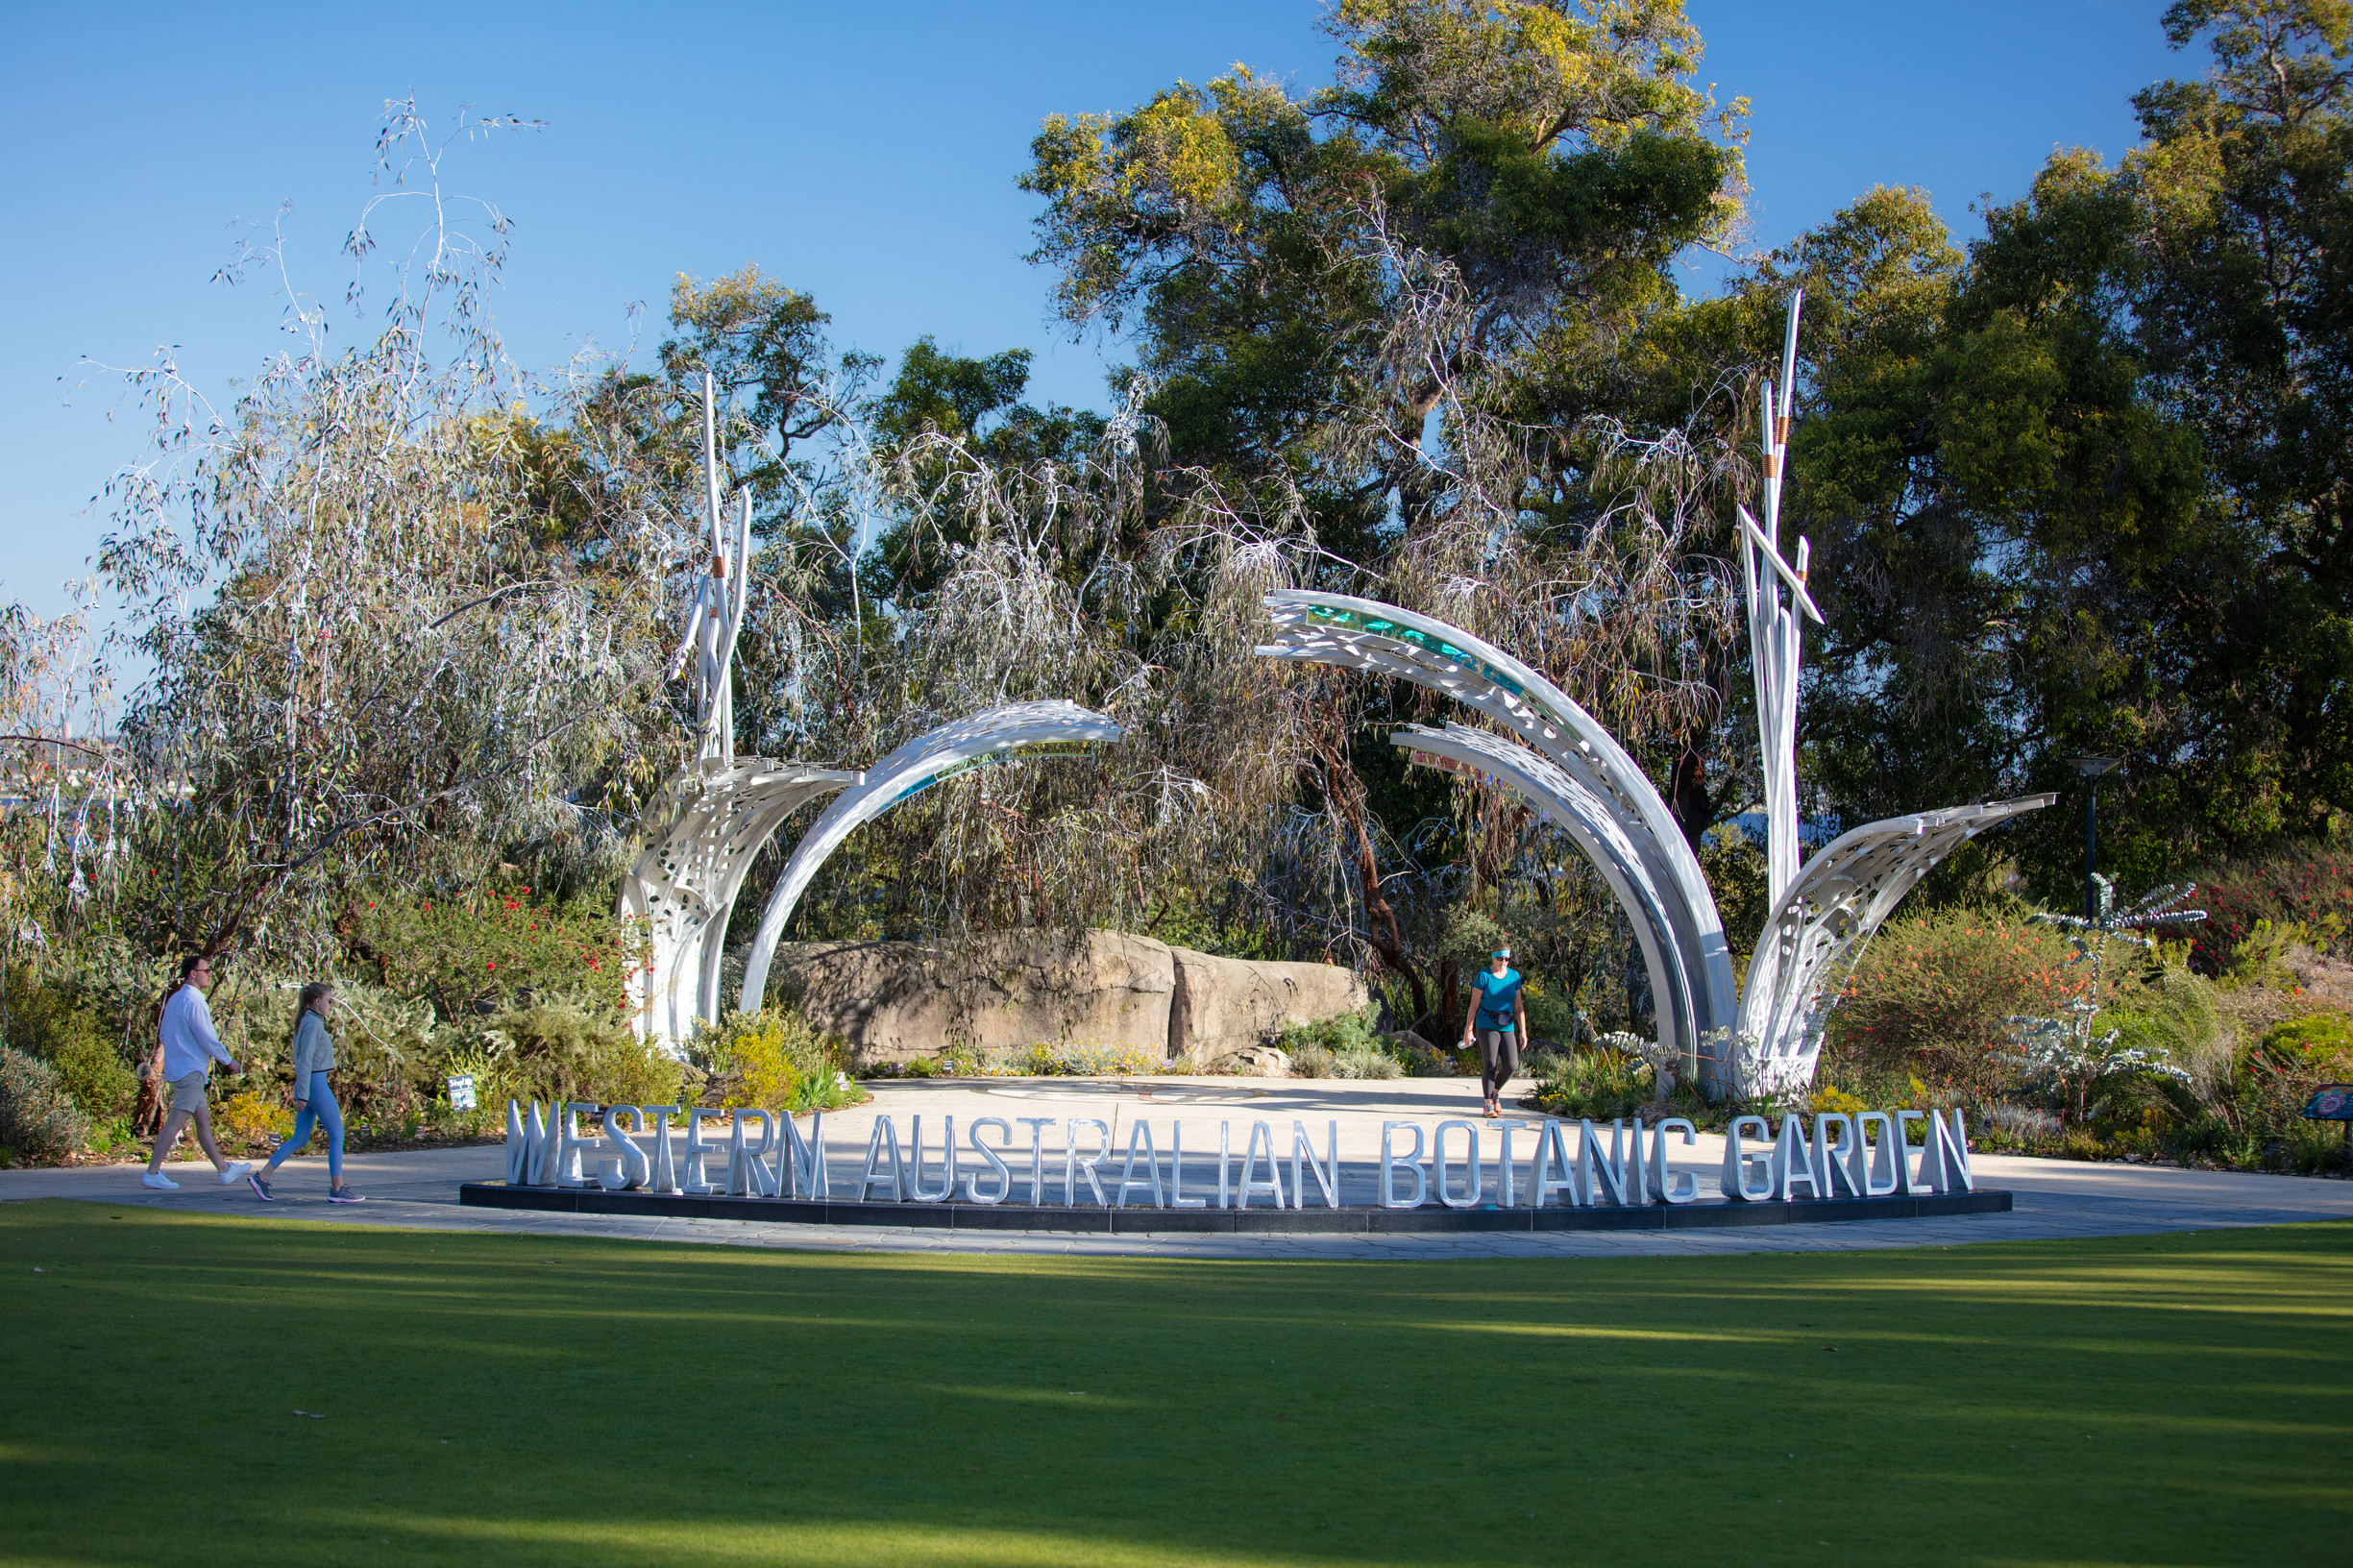 This photograph shows the entrance to the Western Australian Botanic Garden. A grey steel sculpture and sign reading “Western Australian Botanic Garden” in capital letters marks the entrance. There are two (2) people walking from the left towards this sign, with one (1) person walking out of the Botanic Garden. Native plants and trees provide a colourful background with various shades of green and yellow with pops of red. The sky above is blue.